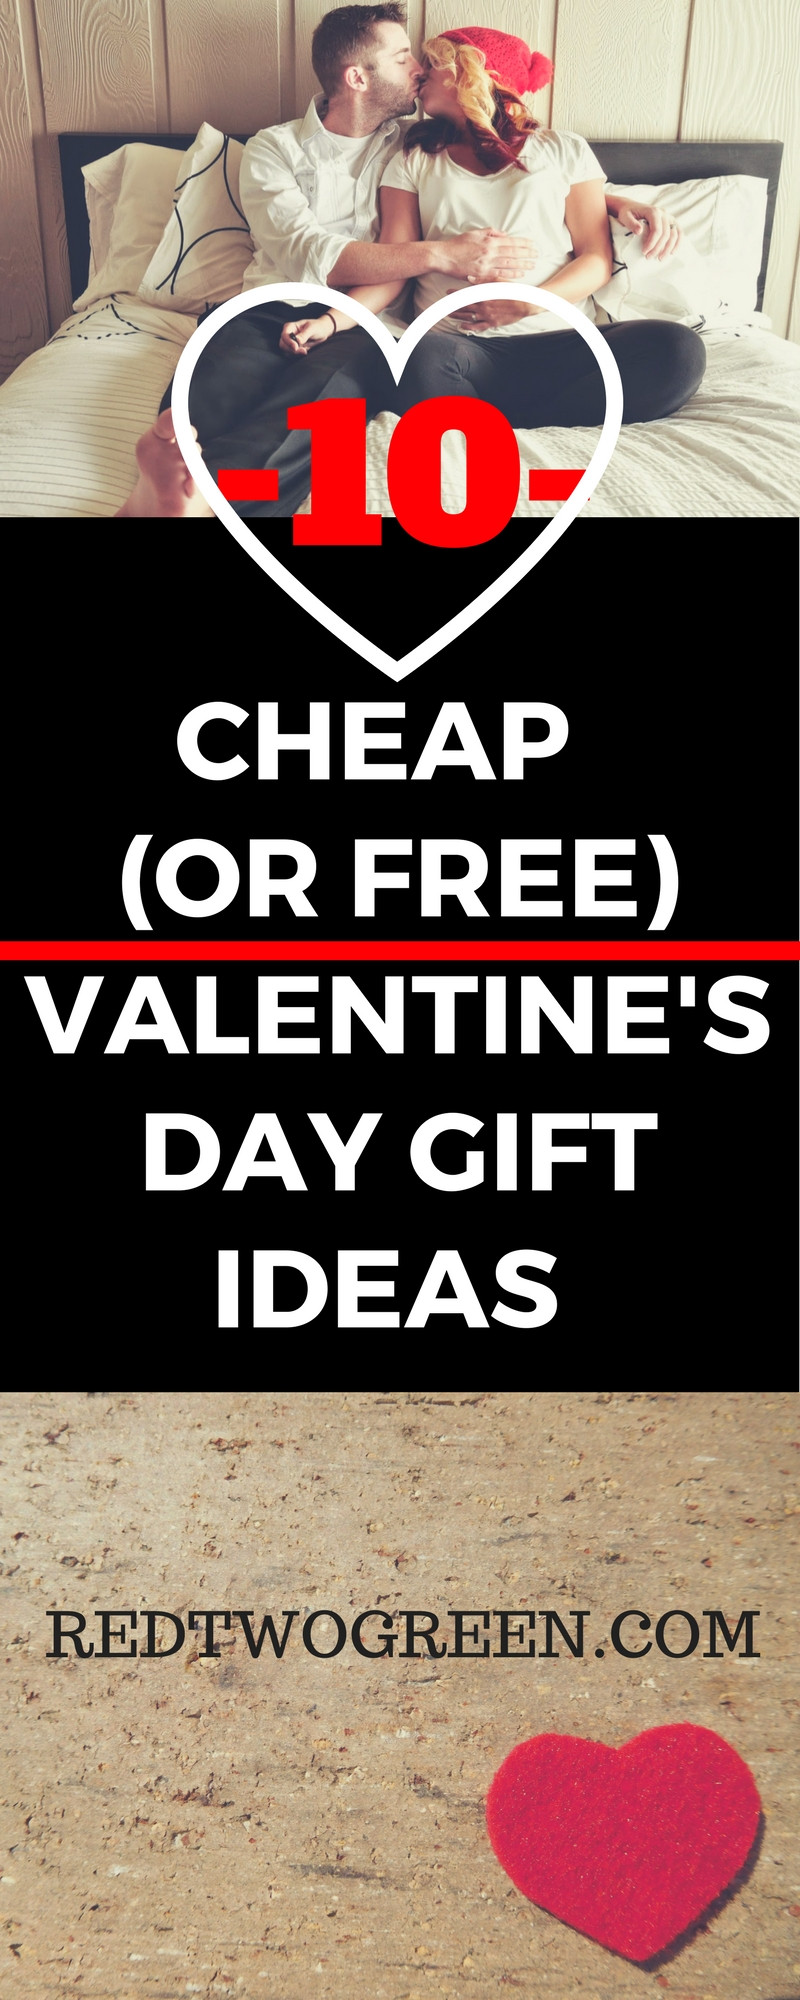 Cheap Valentines Gift Ideas
 CHEAP OR FREE VALENTINES DAY GIFT IDEAS for him or for